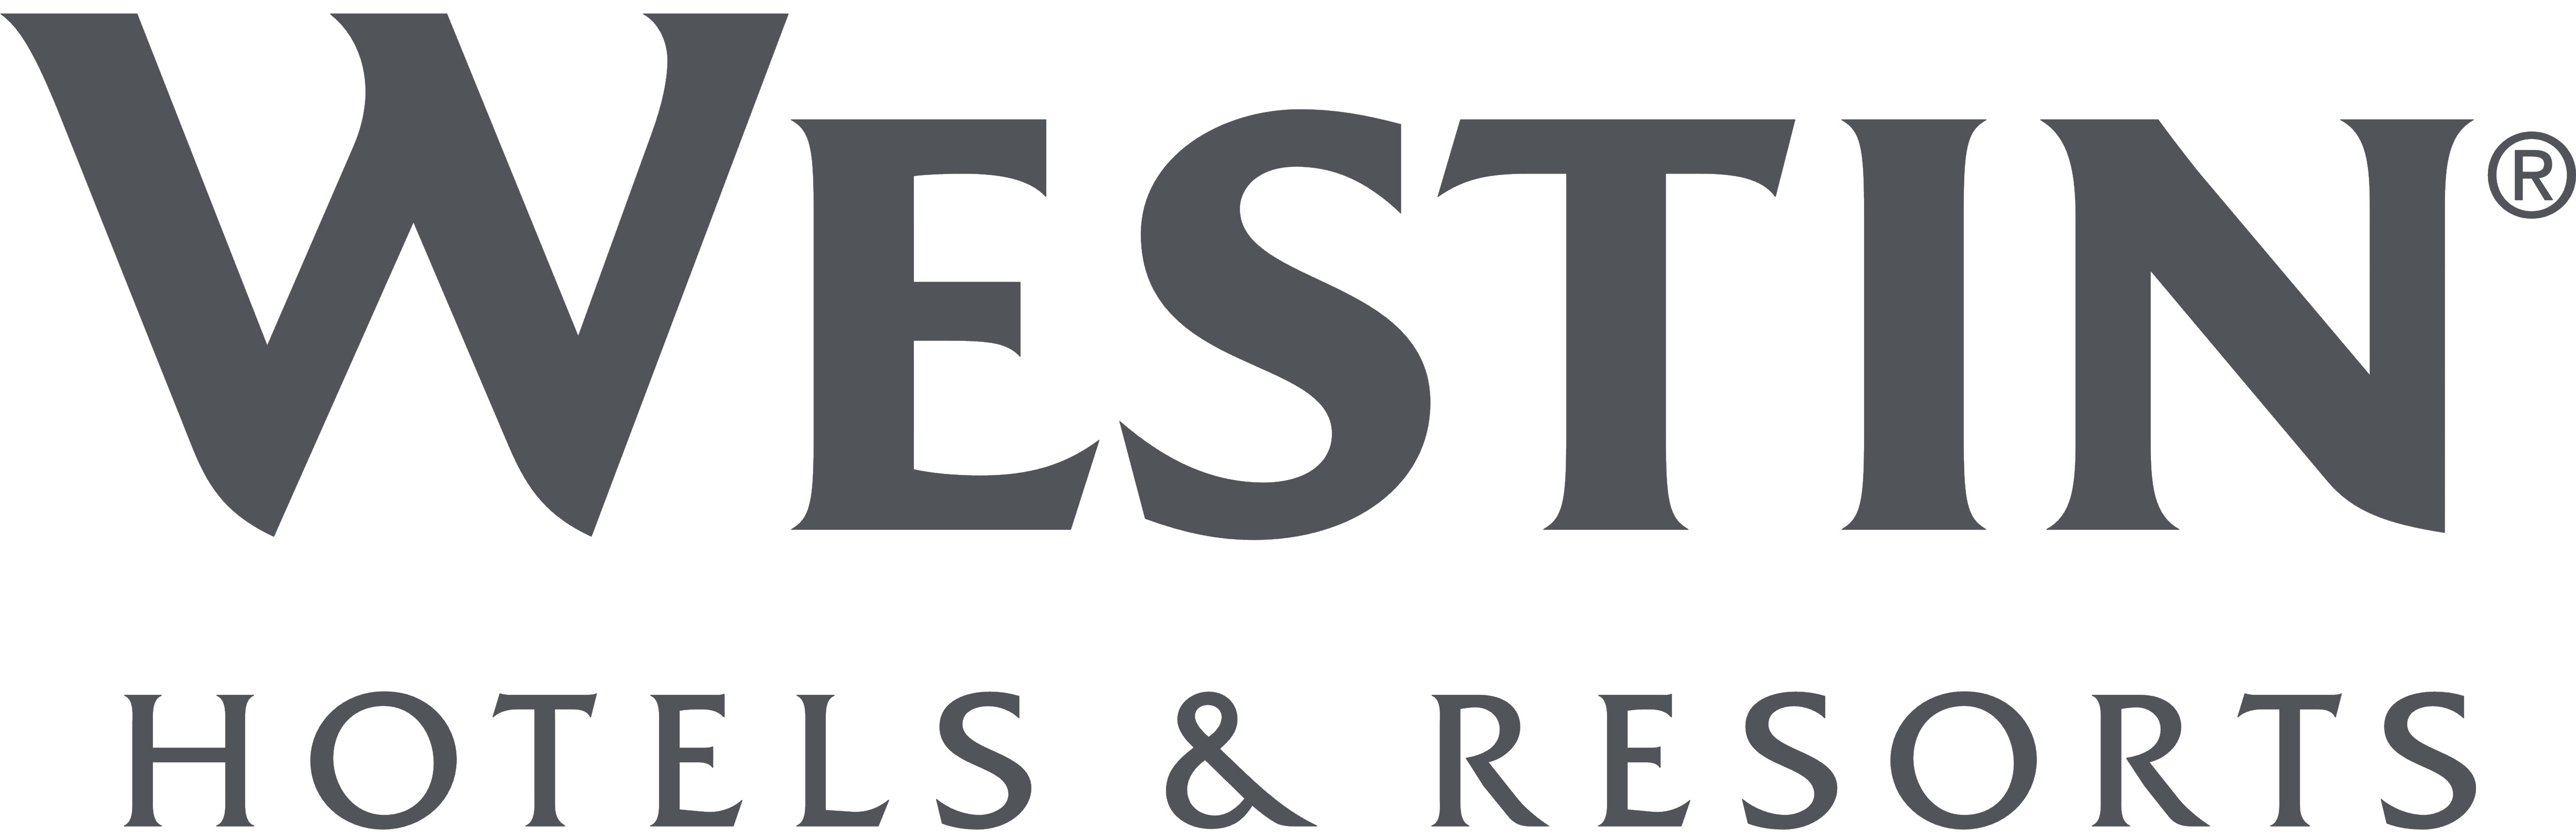 westin hotels and resorts download png #41802